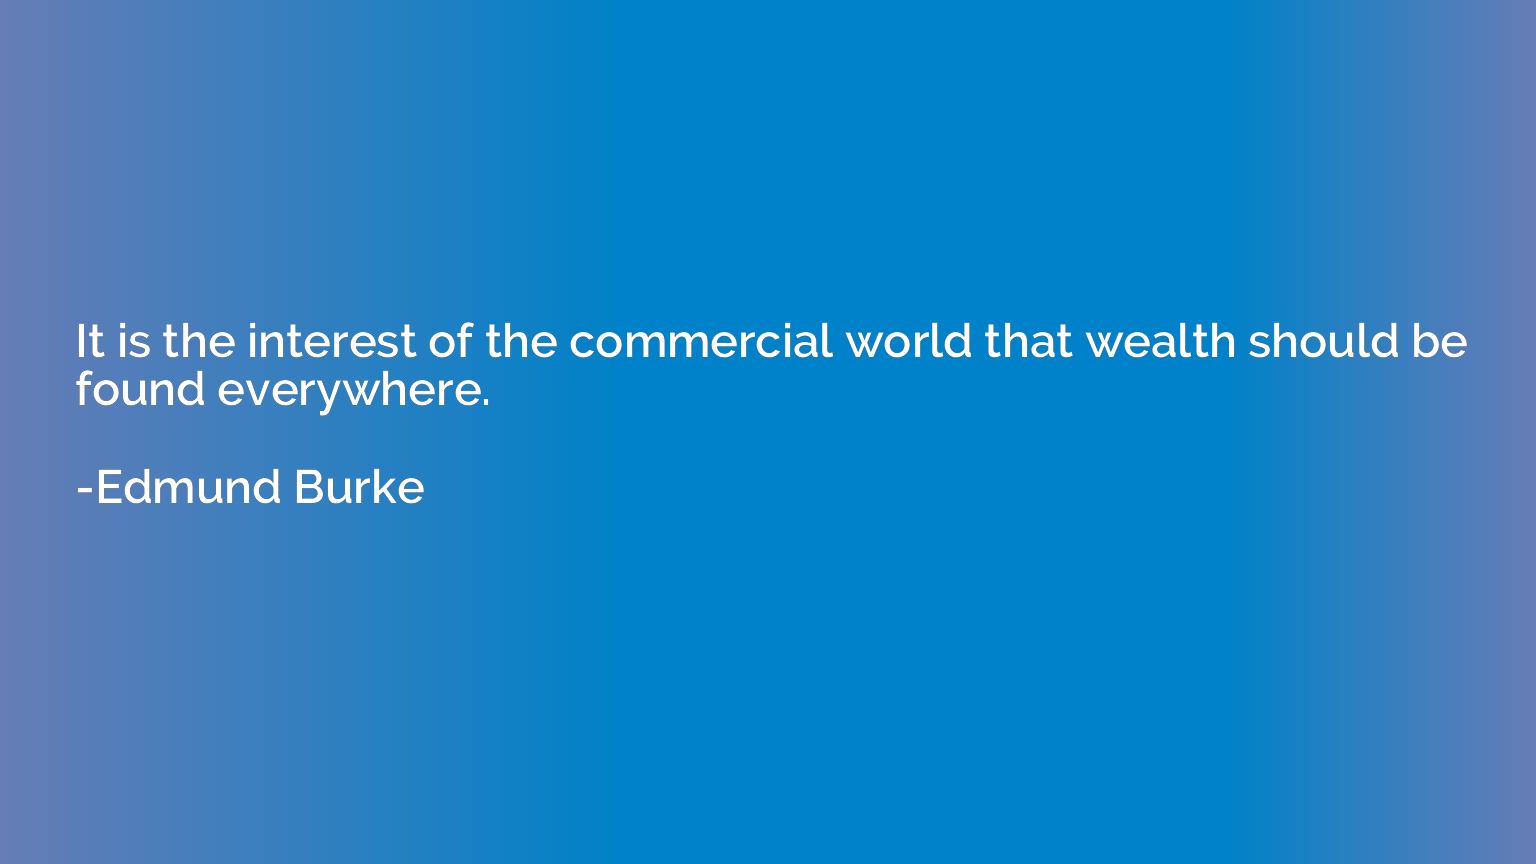 It is the interest of the commercial world that wealth shoul